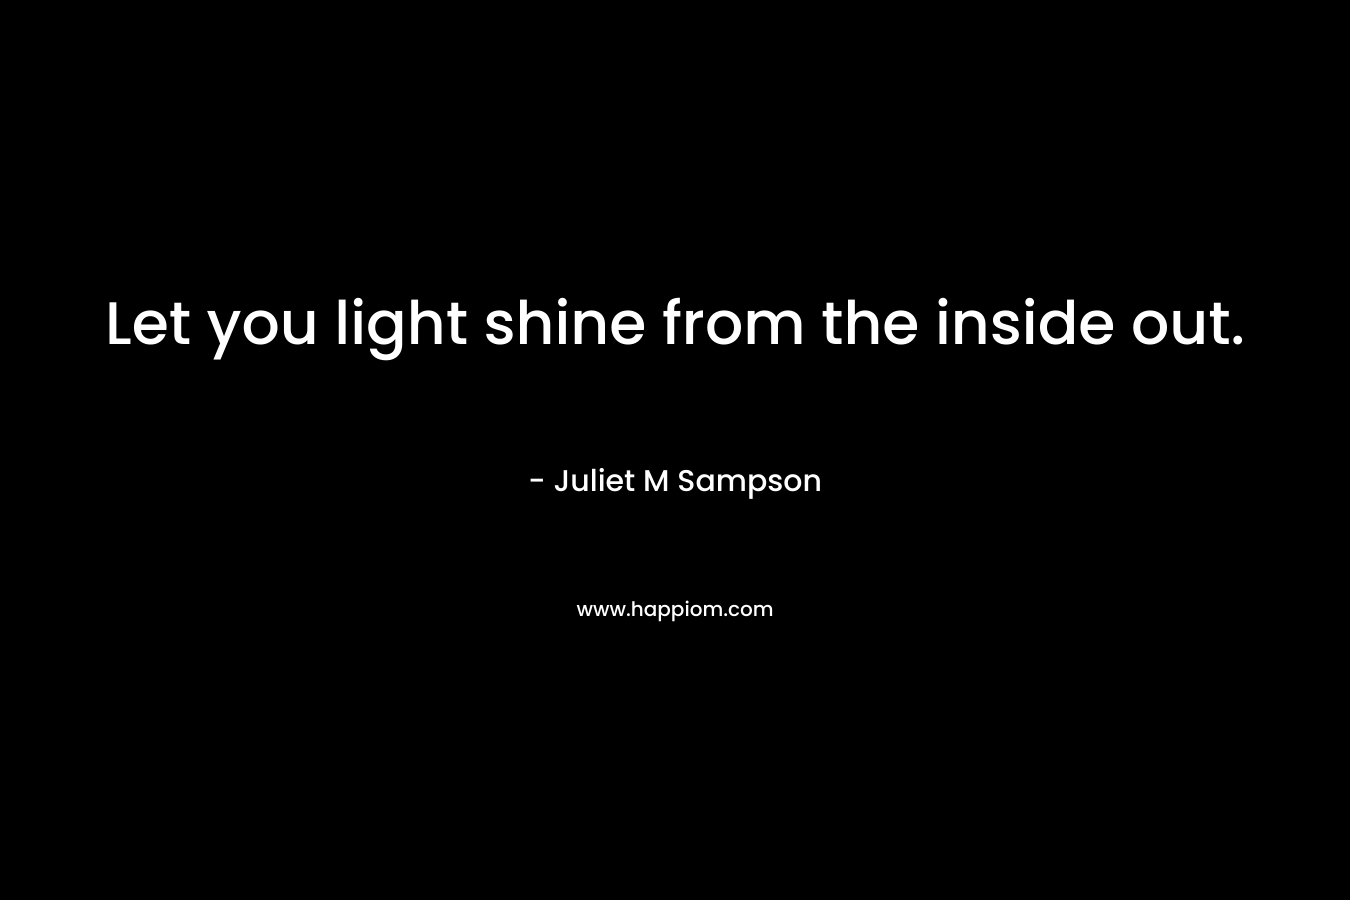 Let you light shine from the inside out. – Juliet M Sampson